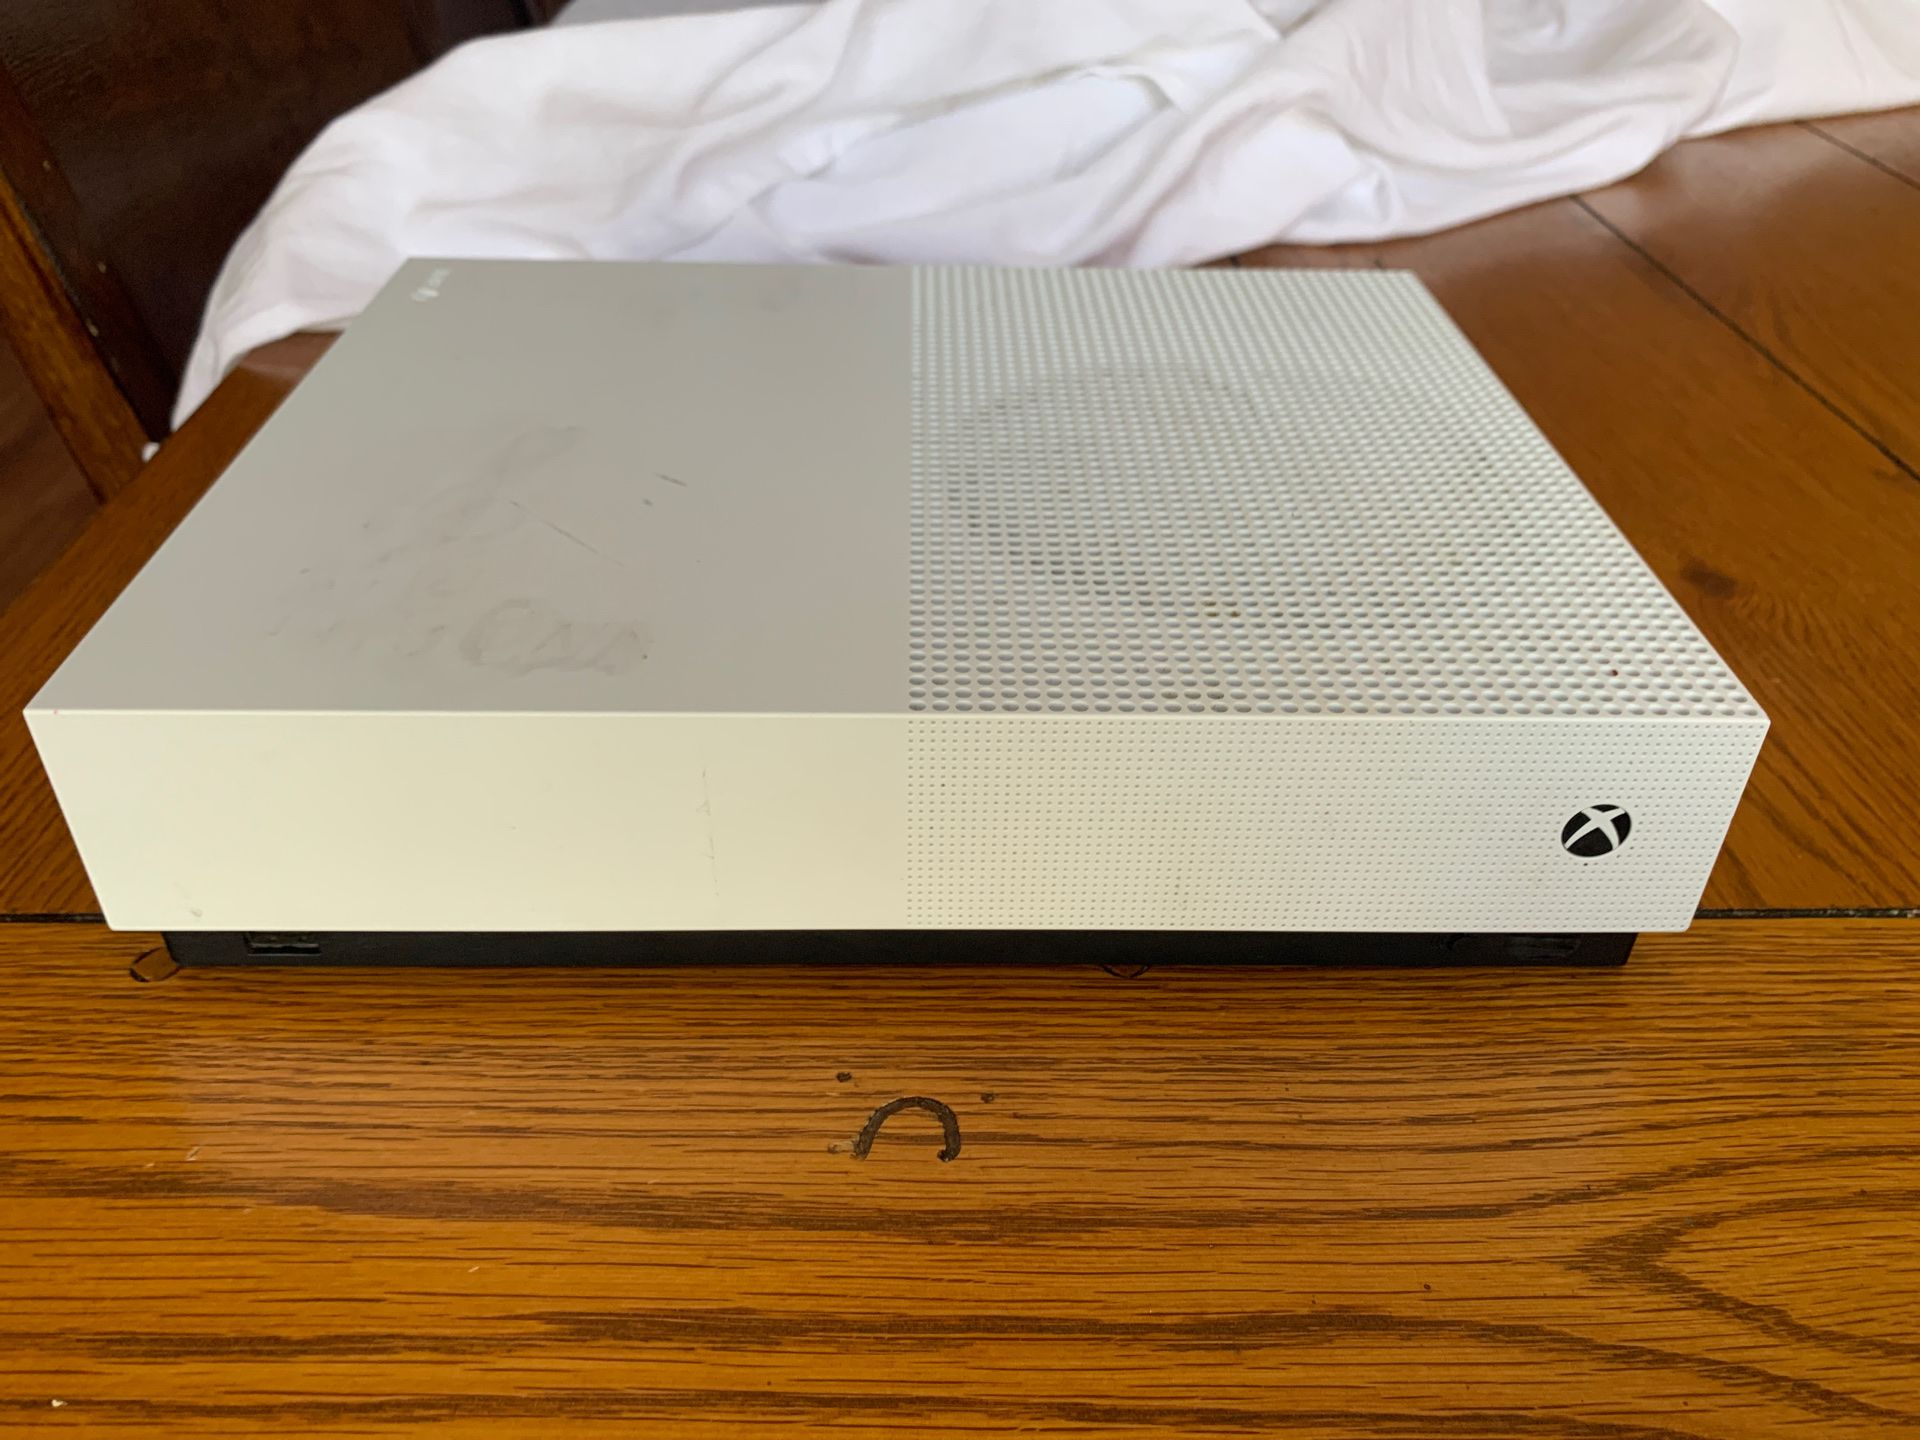 Xbox One S all digital edition without controller